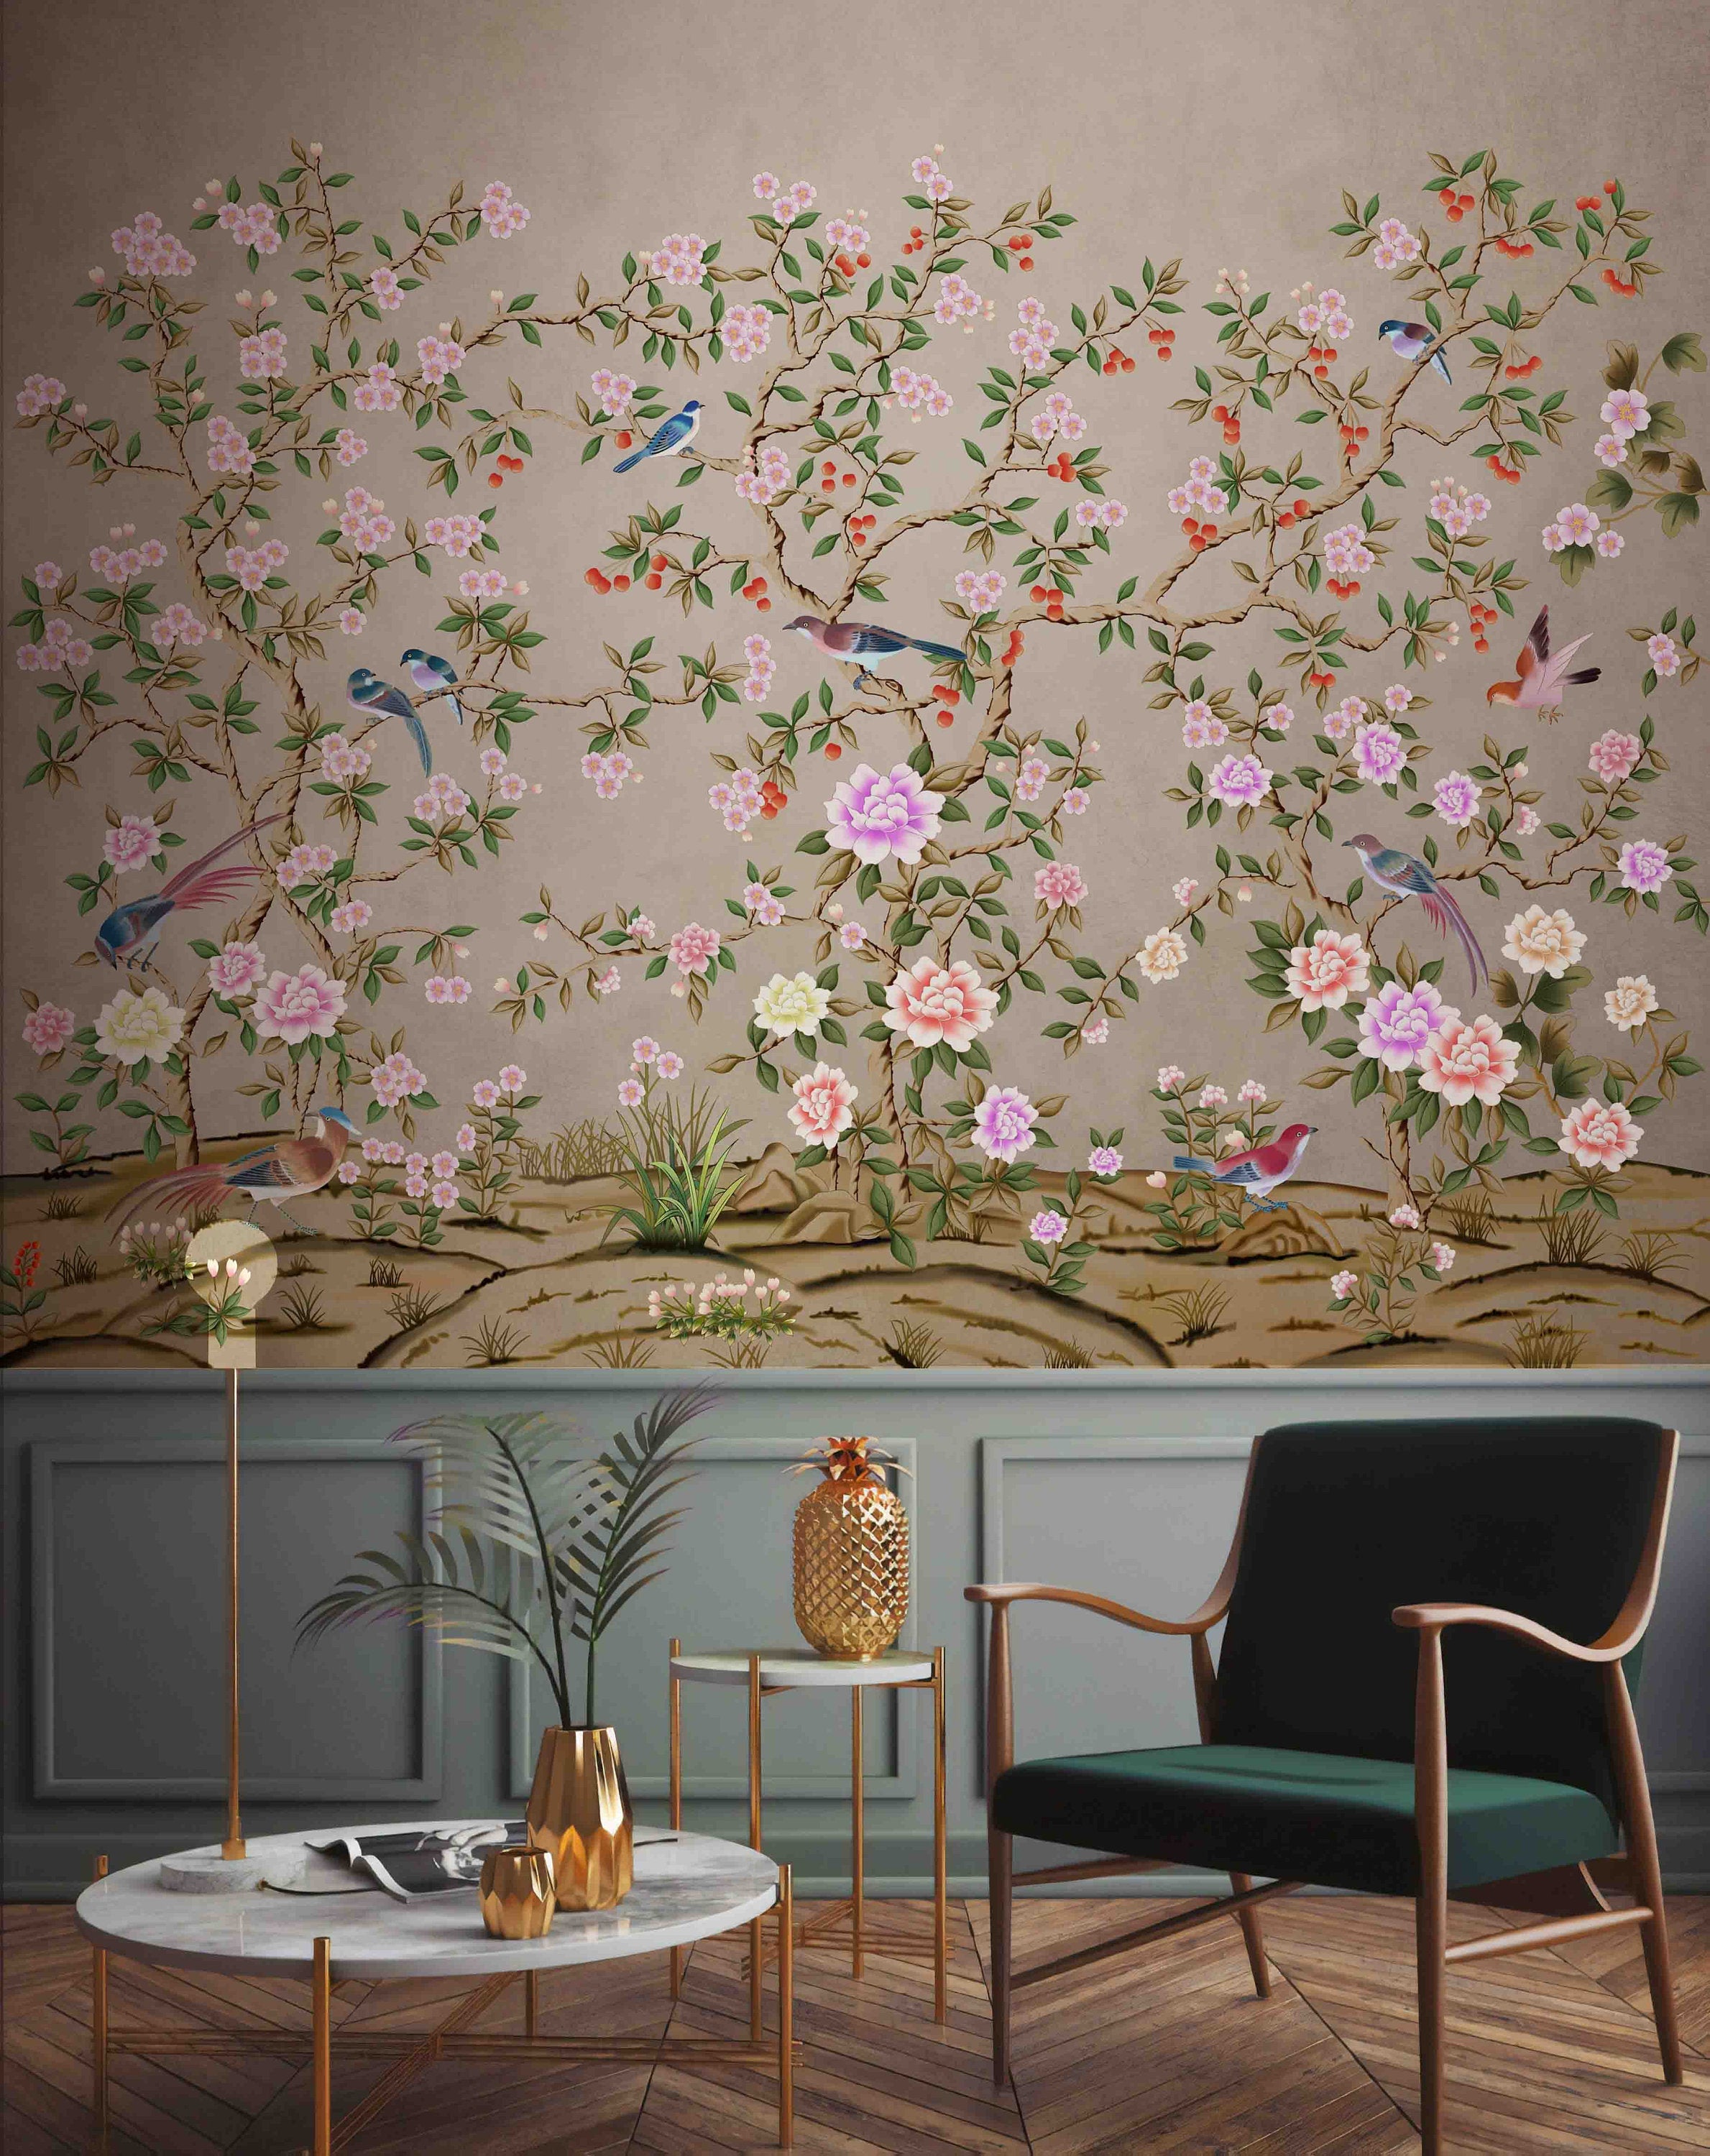 Blue Birds Purple and Pink Garden Flowers Floral Luxury Wallpaper Restaurant Living Room Cafe Office Bedroom Mural Home Wall Art Removable